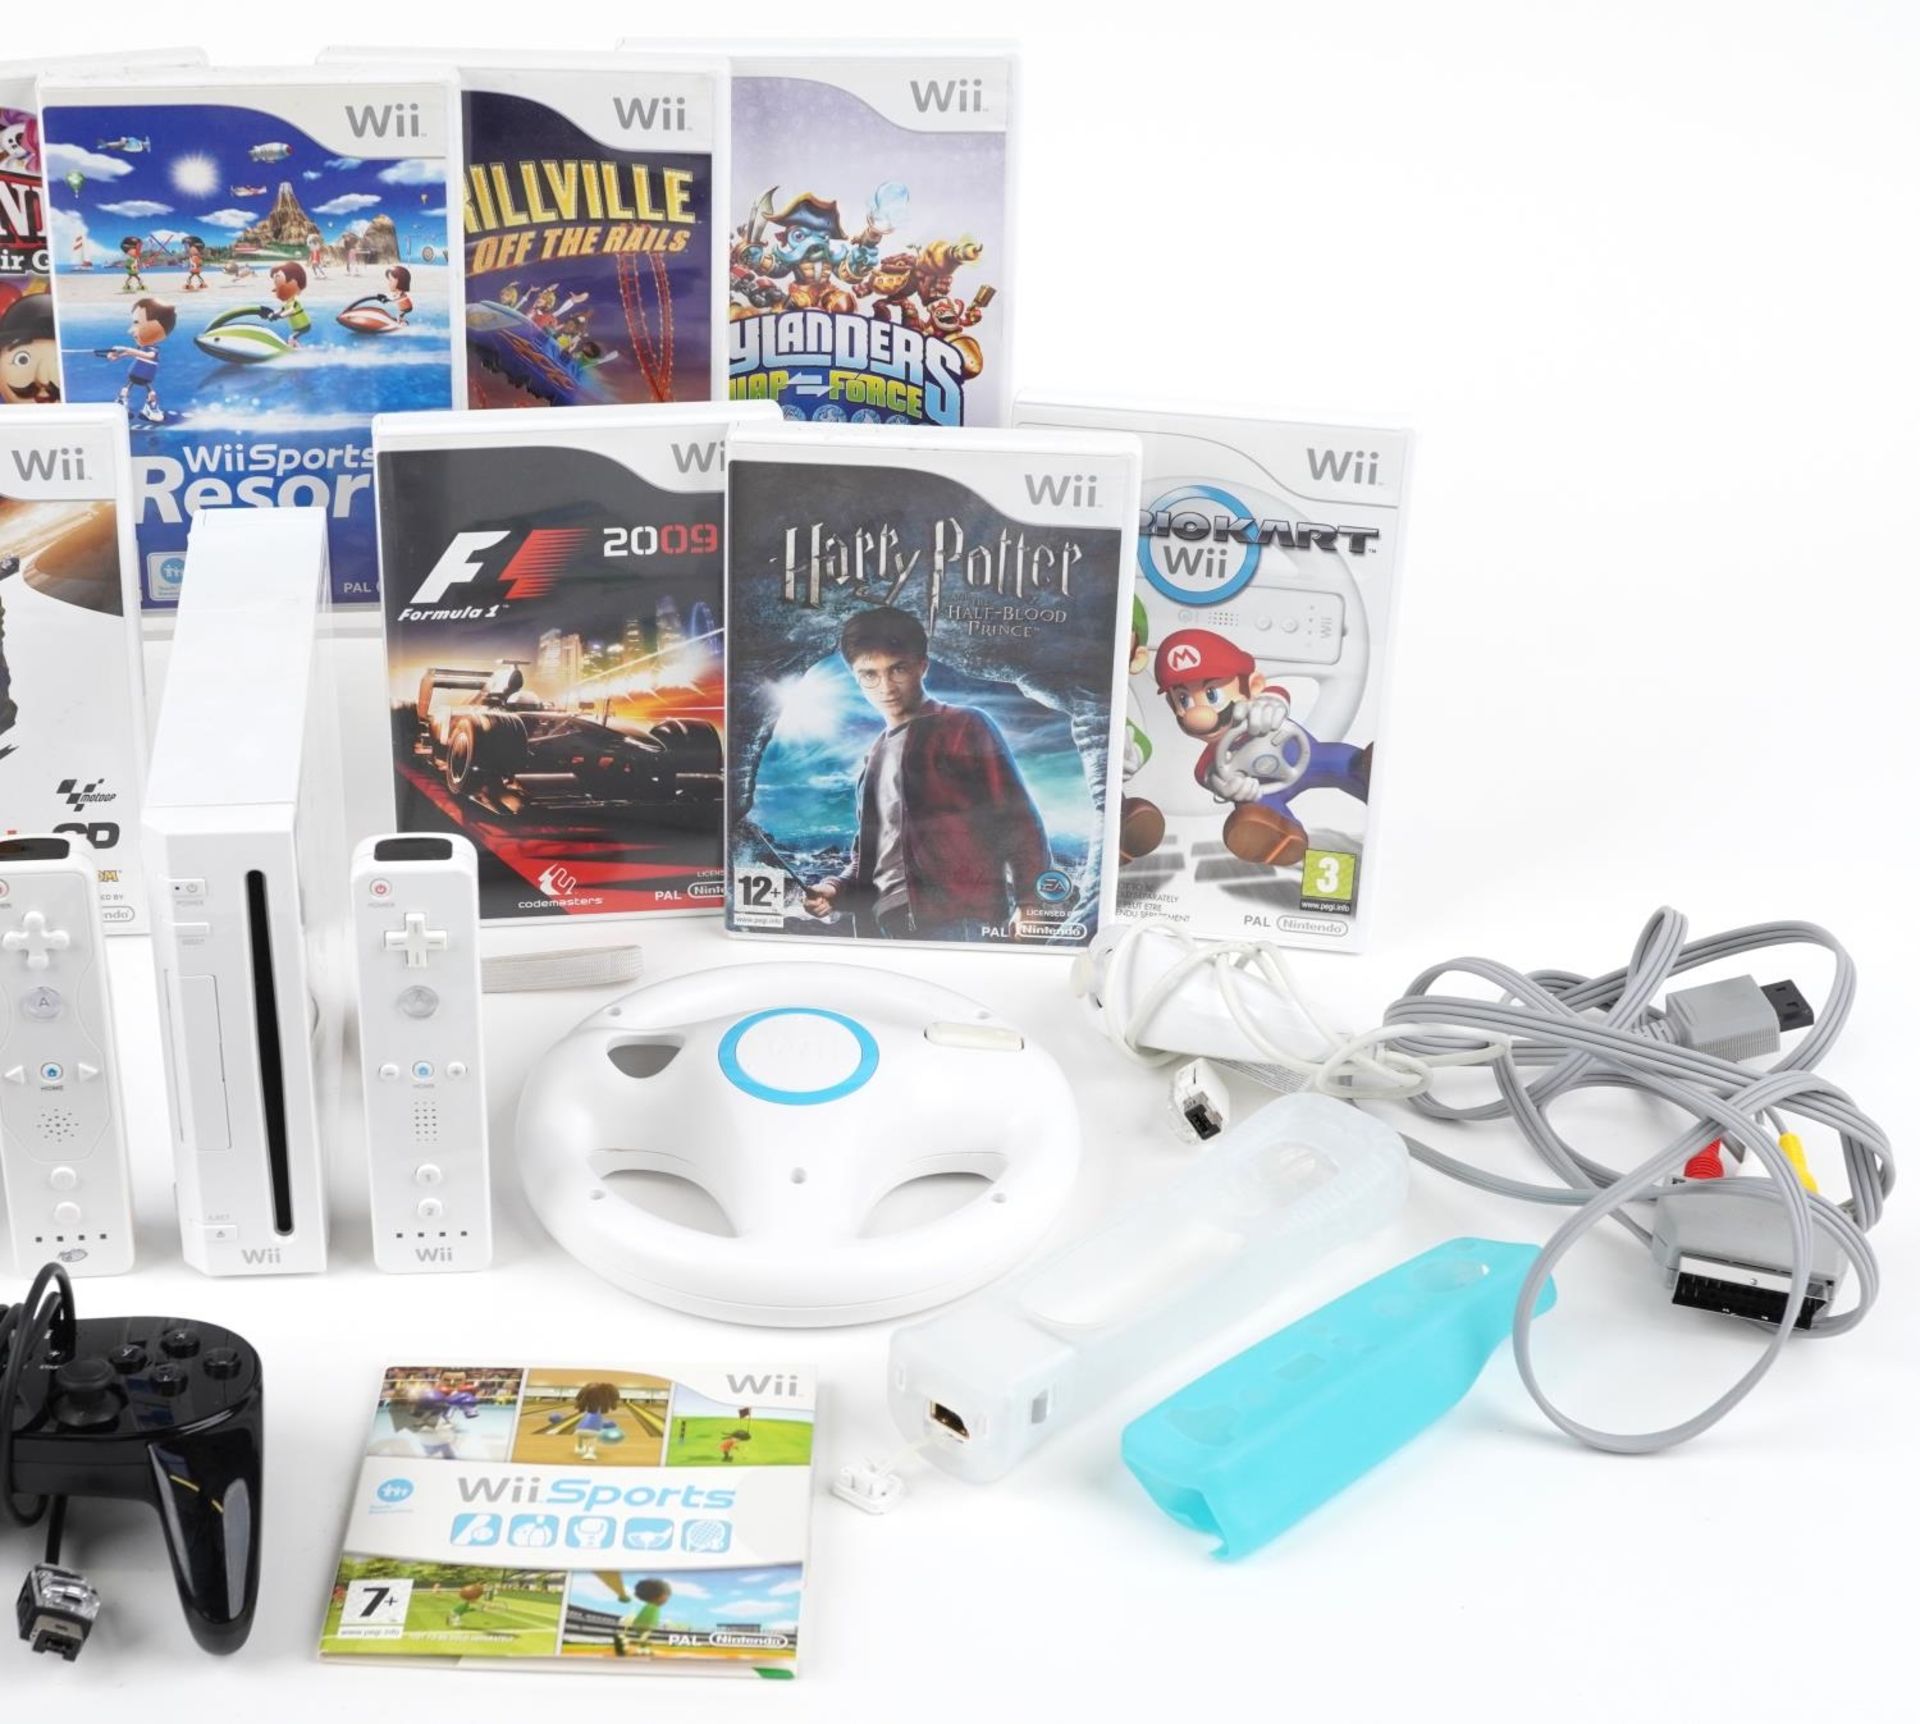 Nintendo Wii games console with controllers, accessories and a collection of games - Image 3 of 3